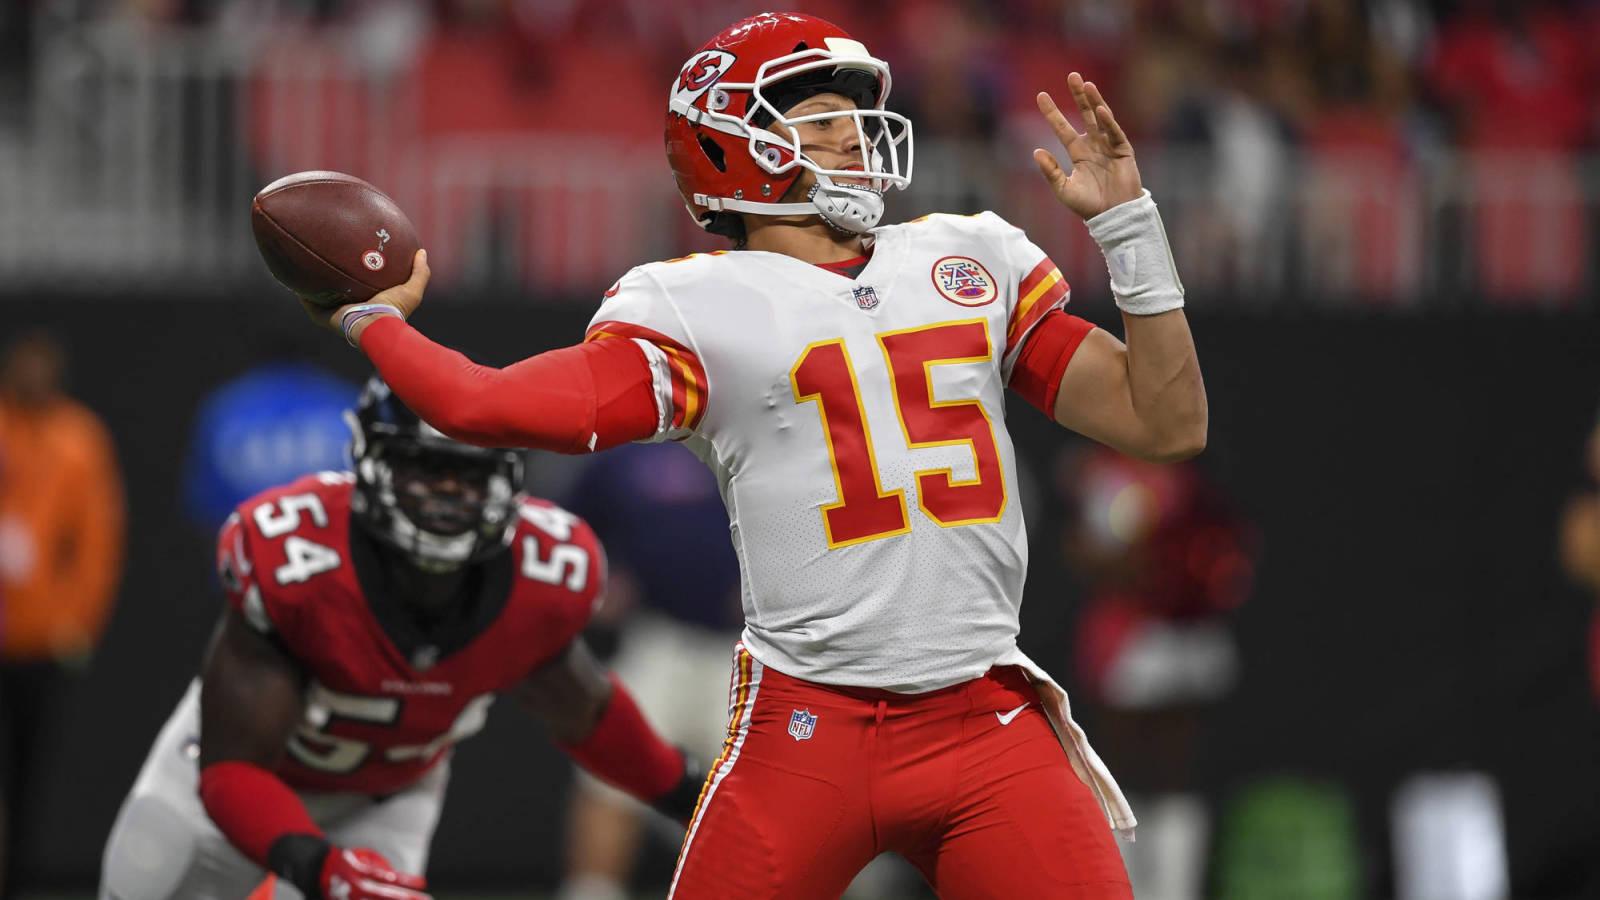 Jalen Ramsey and Mike Evans impressed with Patrick Mahomes arm